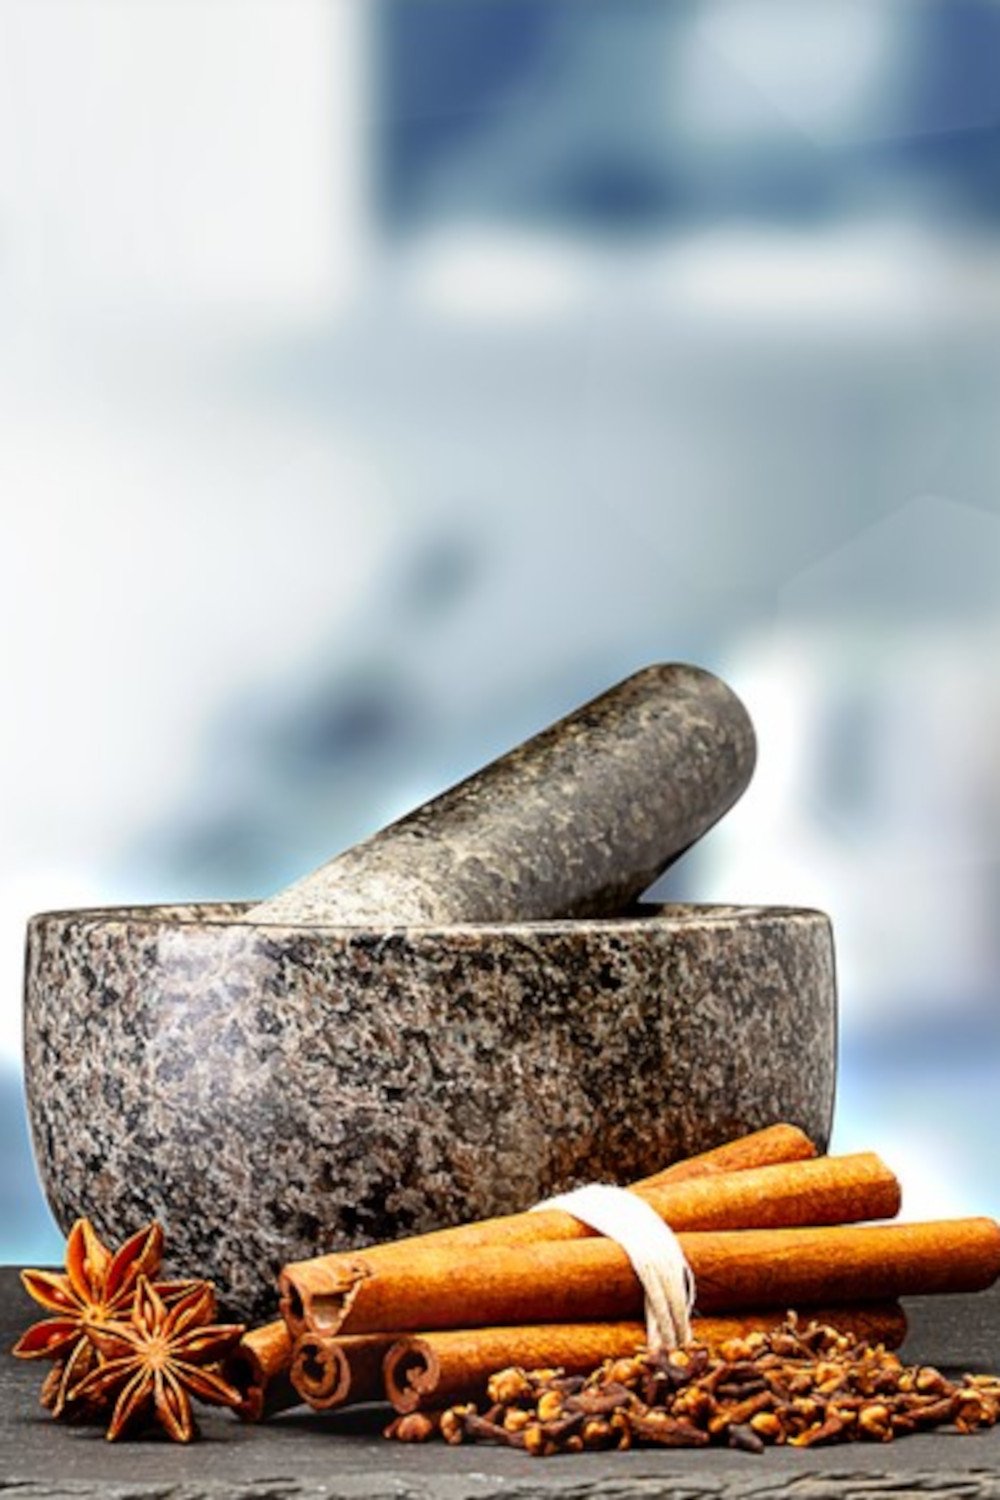 A mortar and pestle with star anise, cinnamon quills, and cloves in the foreground